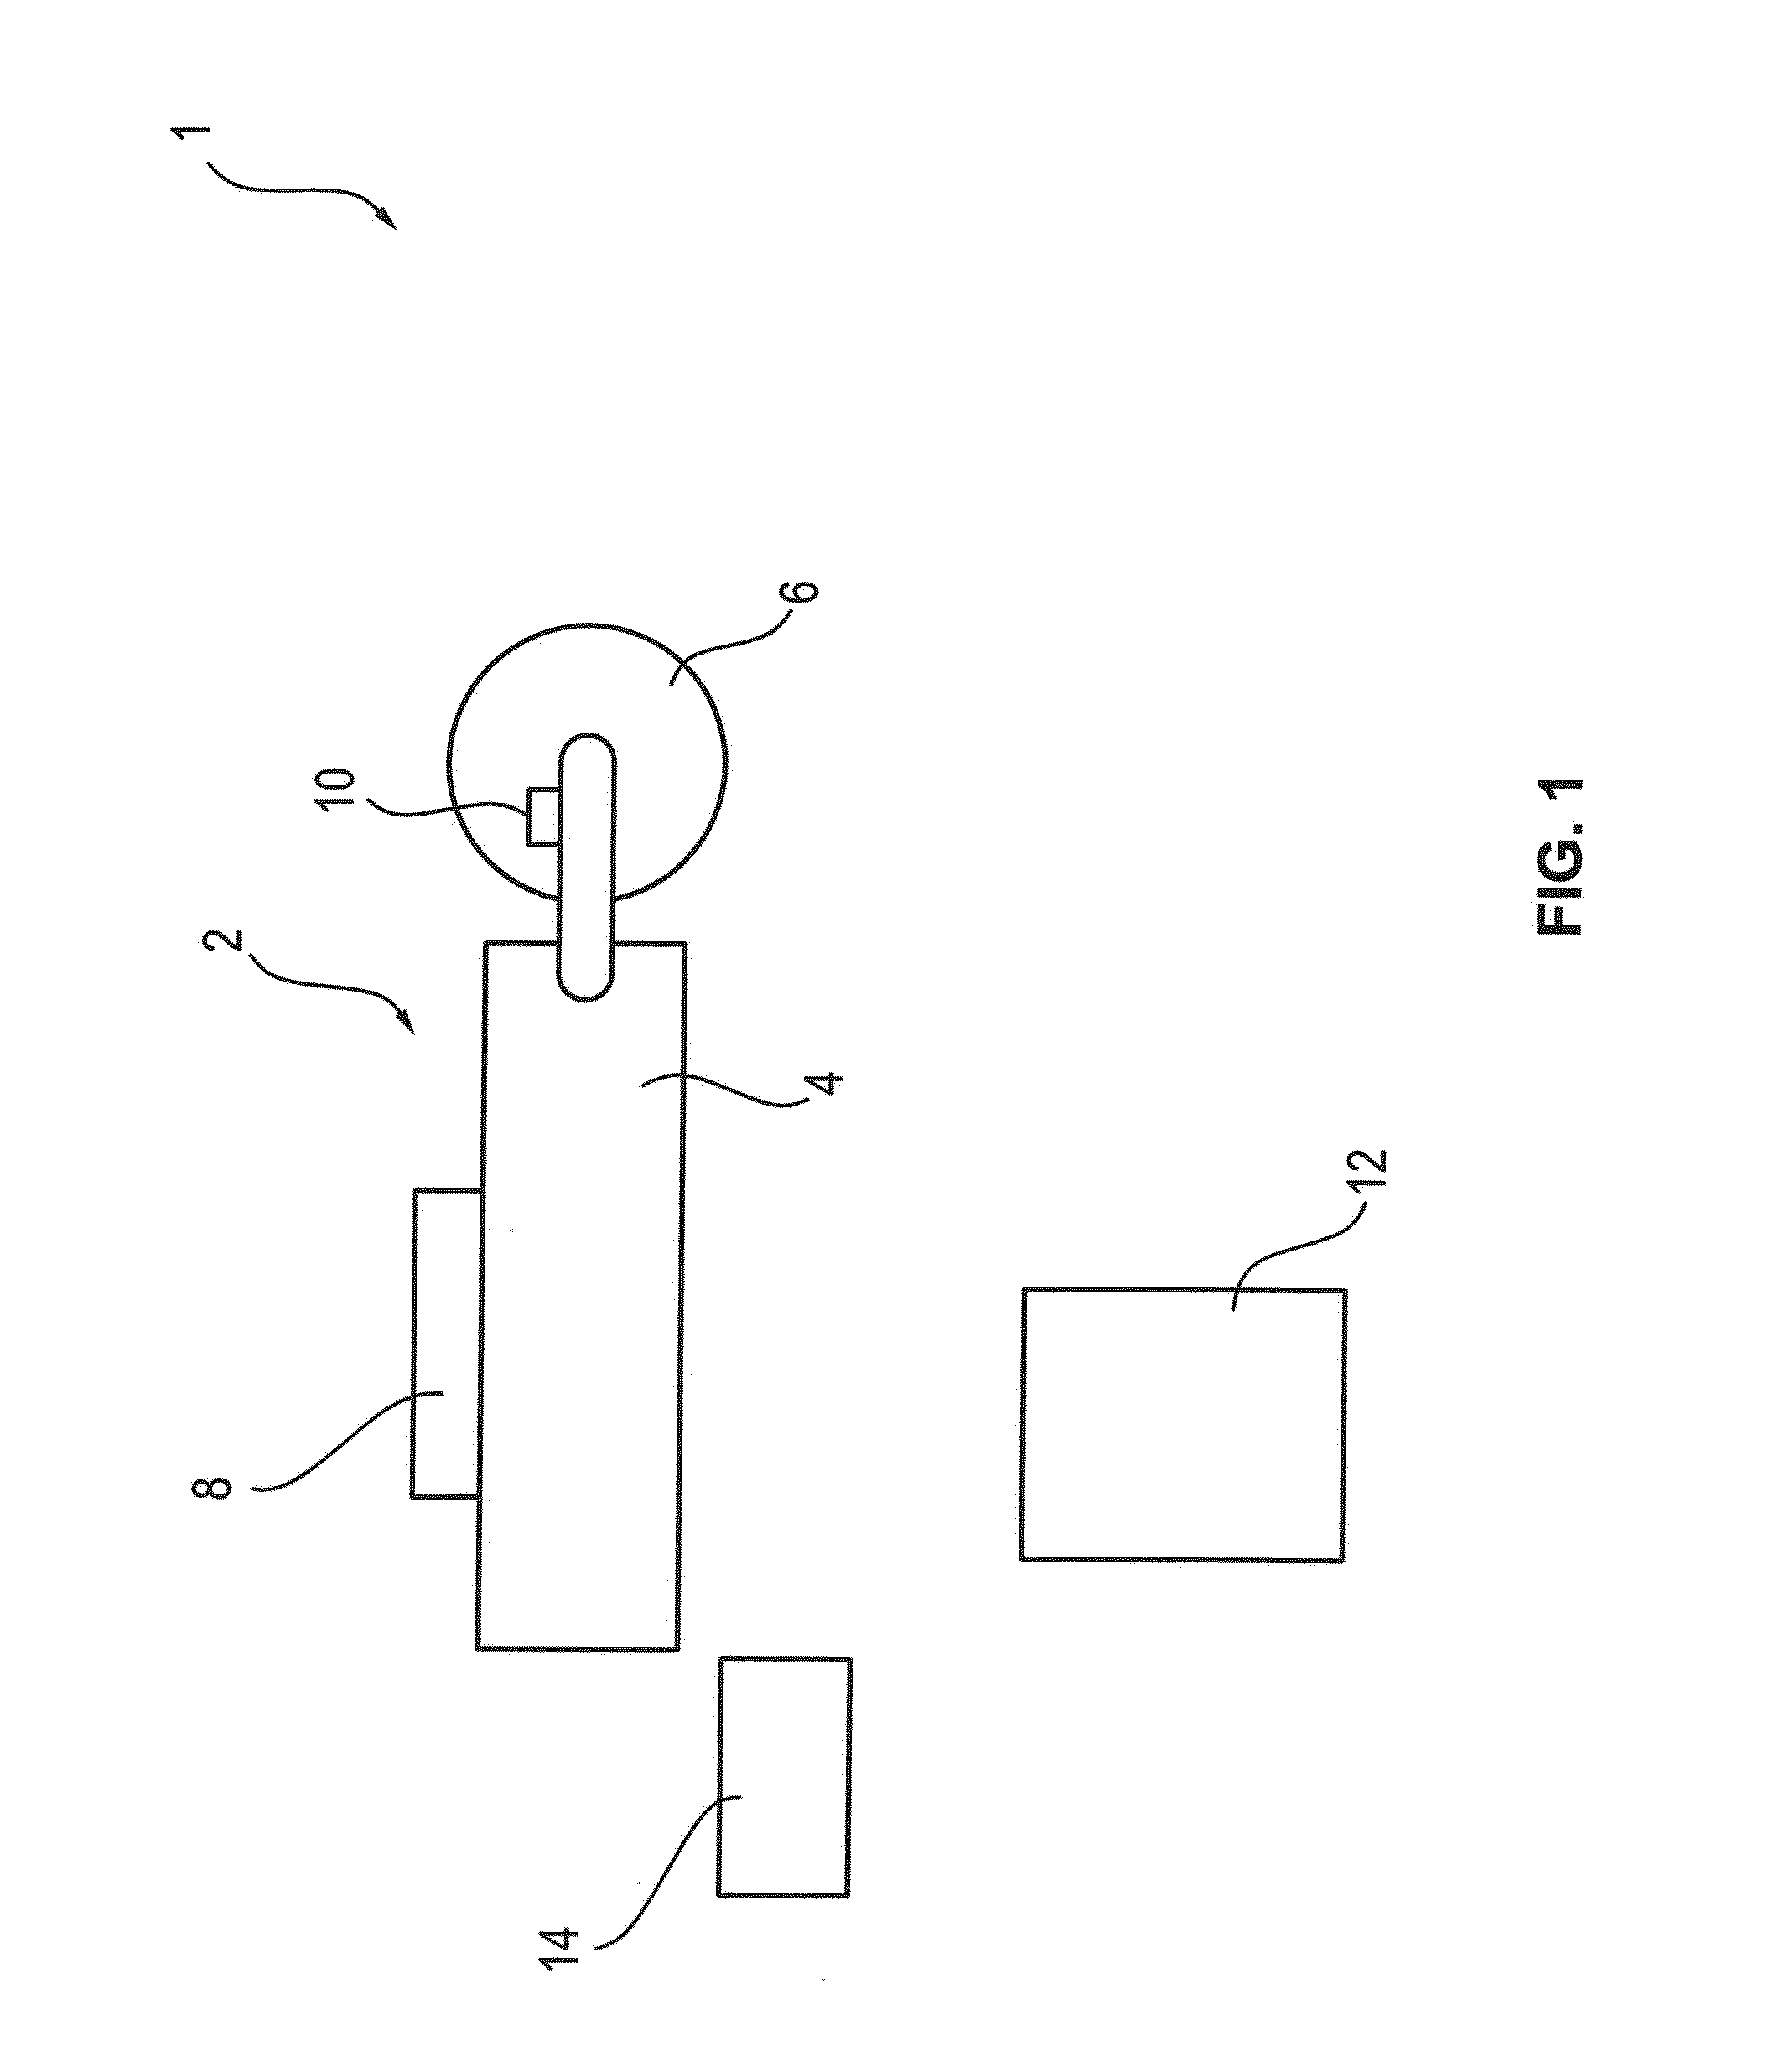 System And Method For Regulated And/Or Limited Speed Control